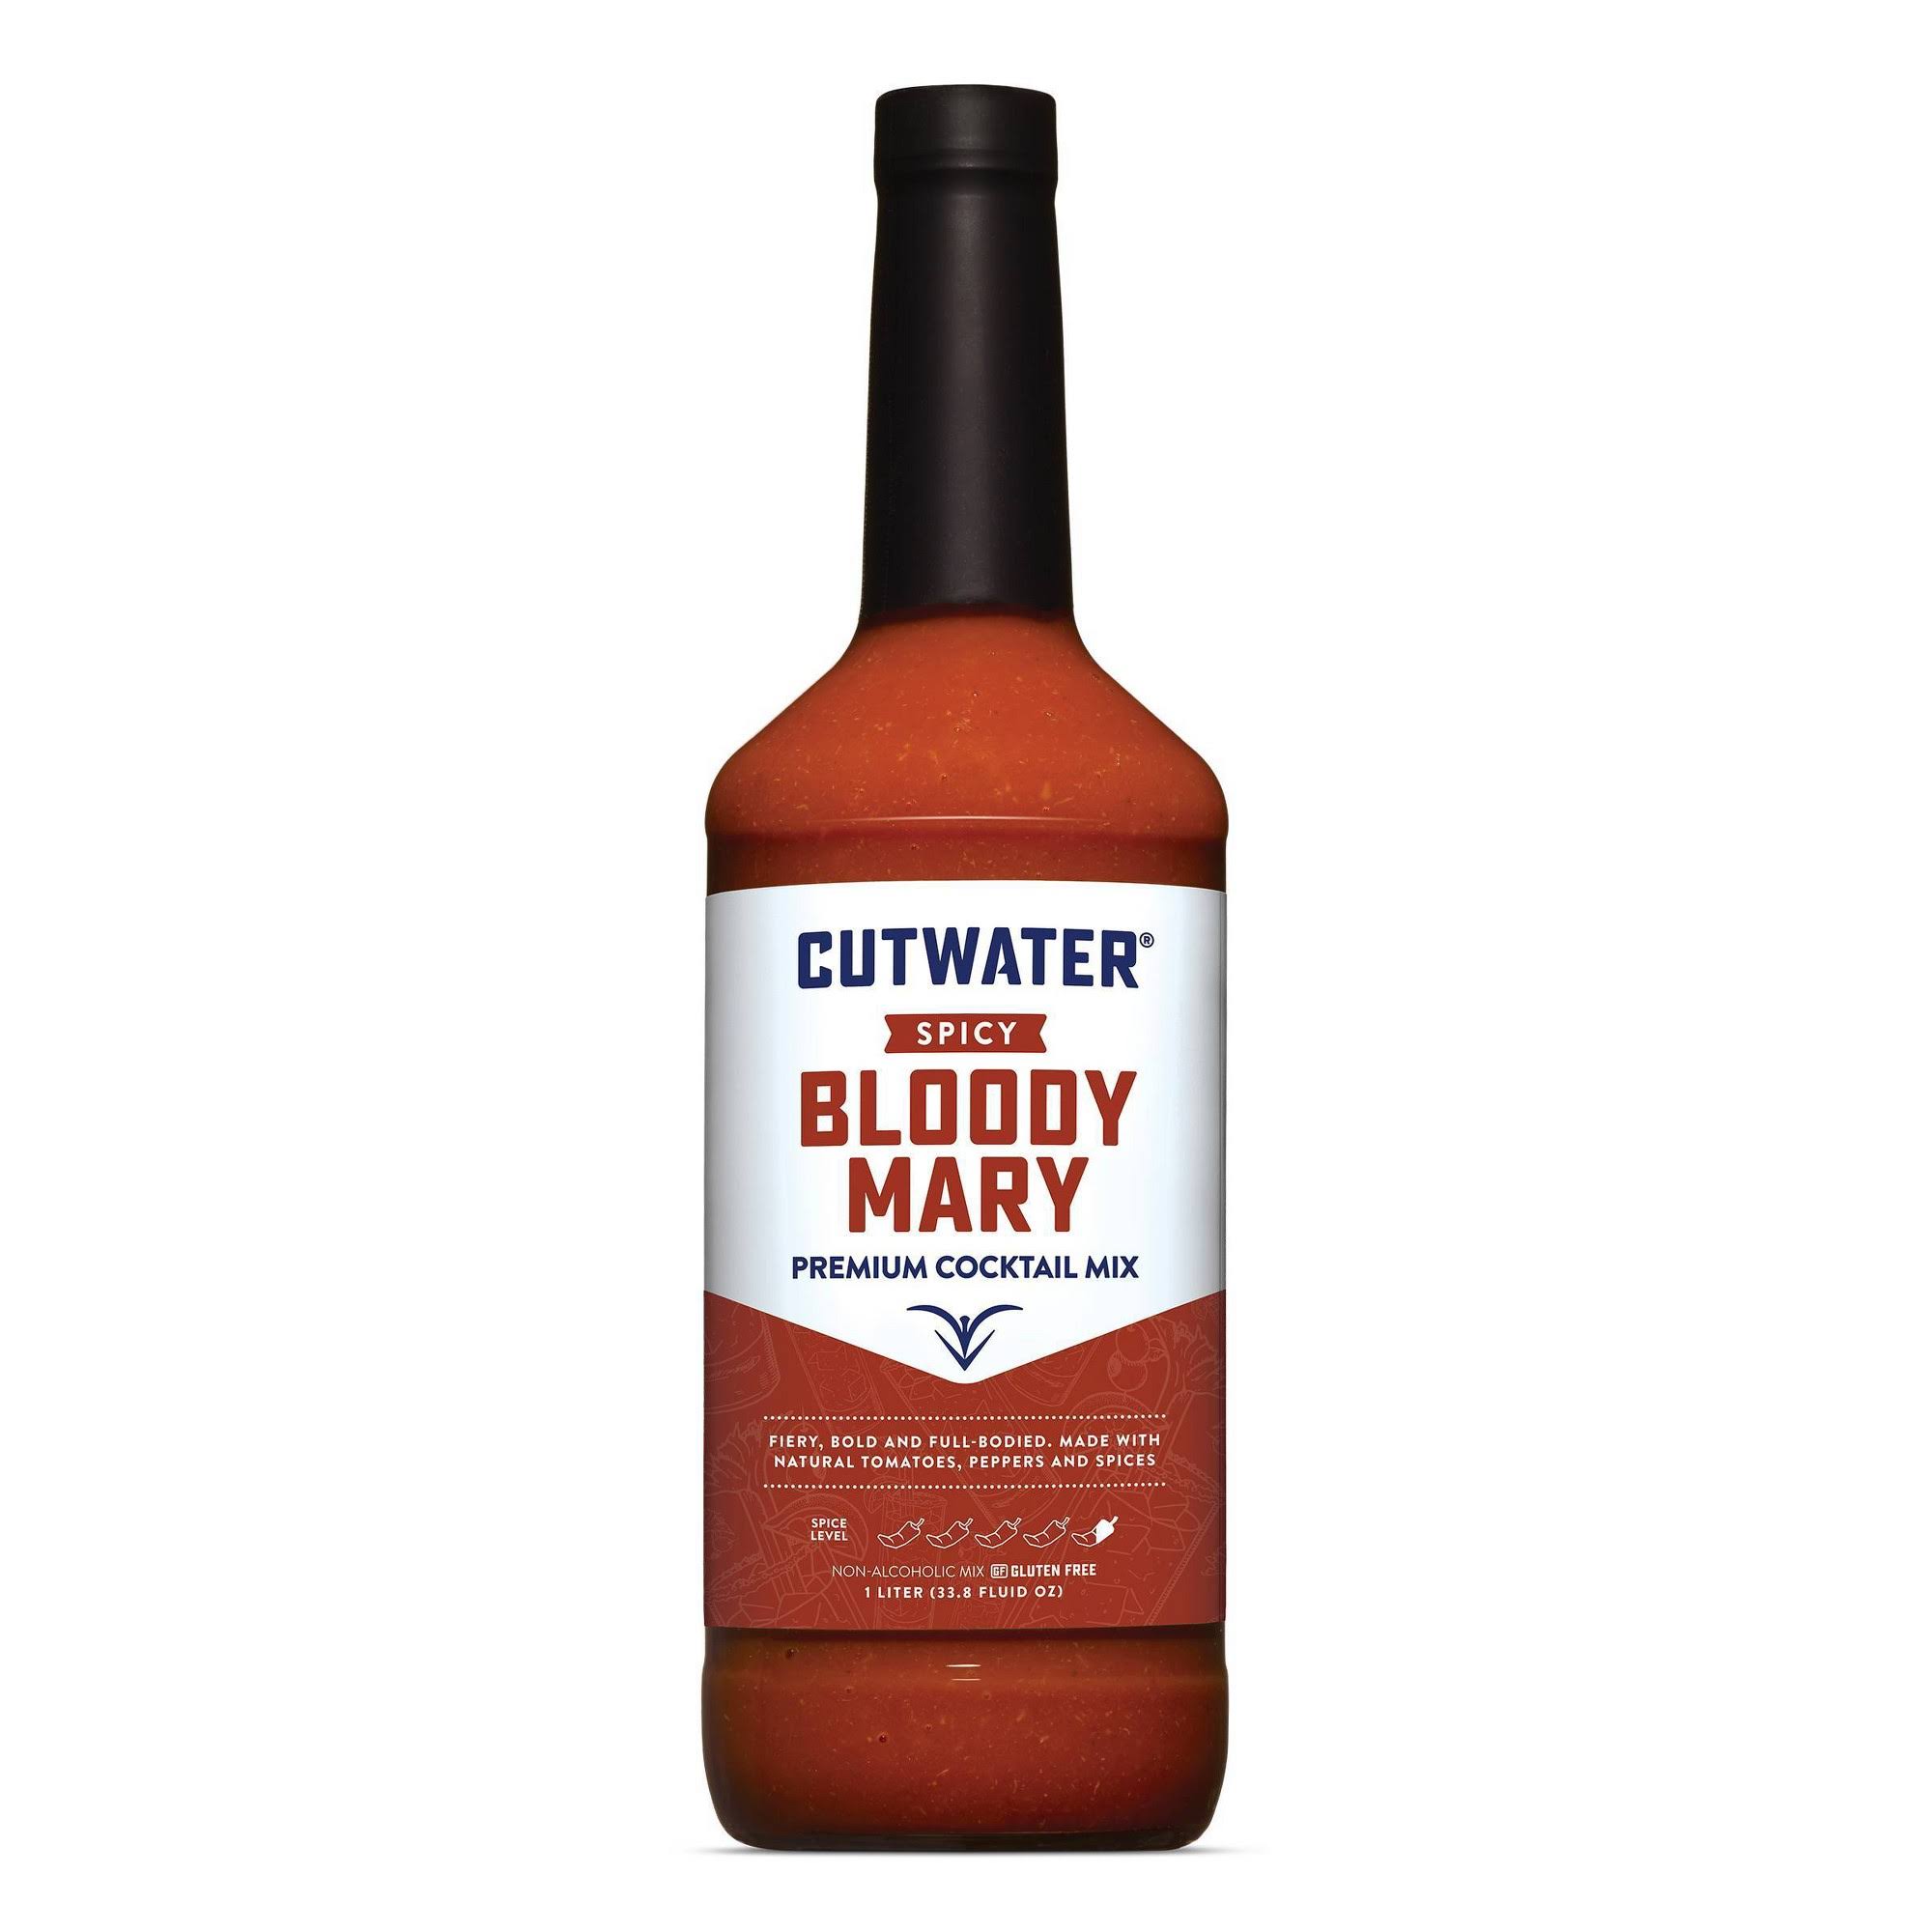 Cutwater Spicy Bloody Mary Cocktail Mix (1L)